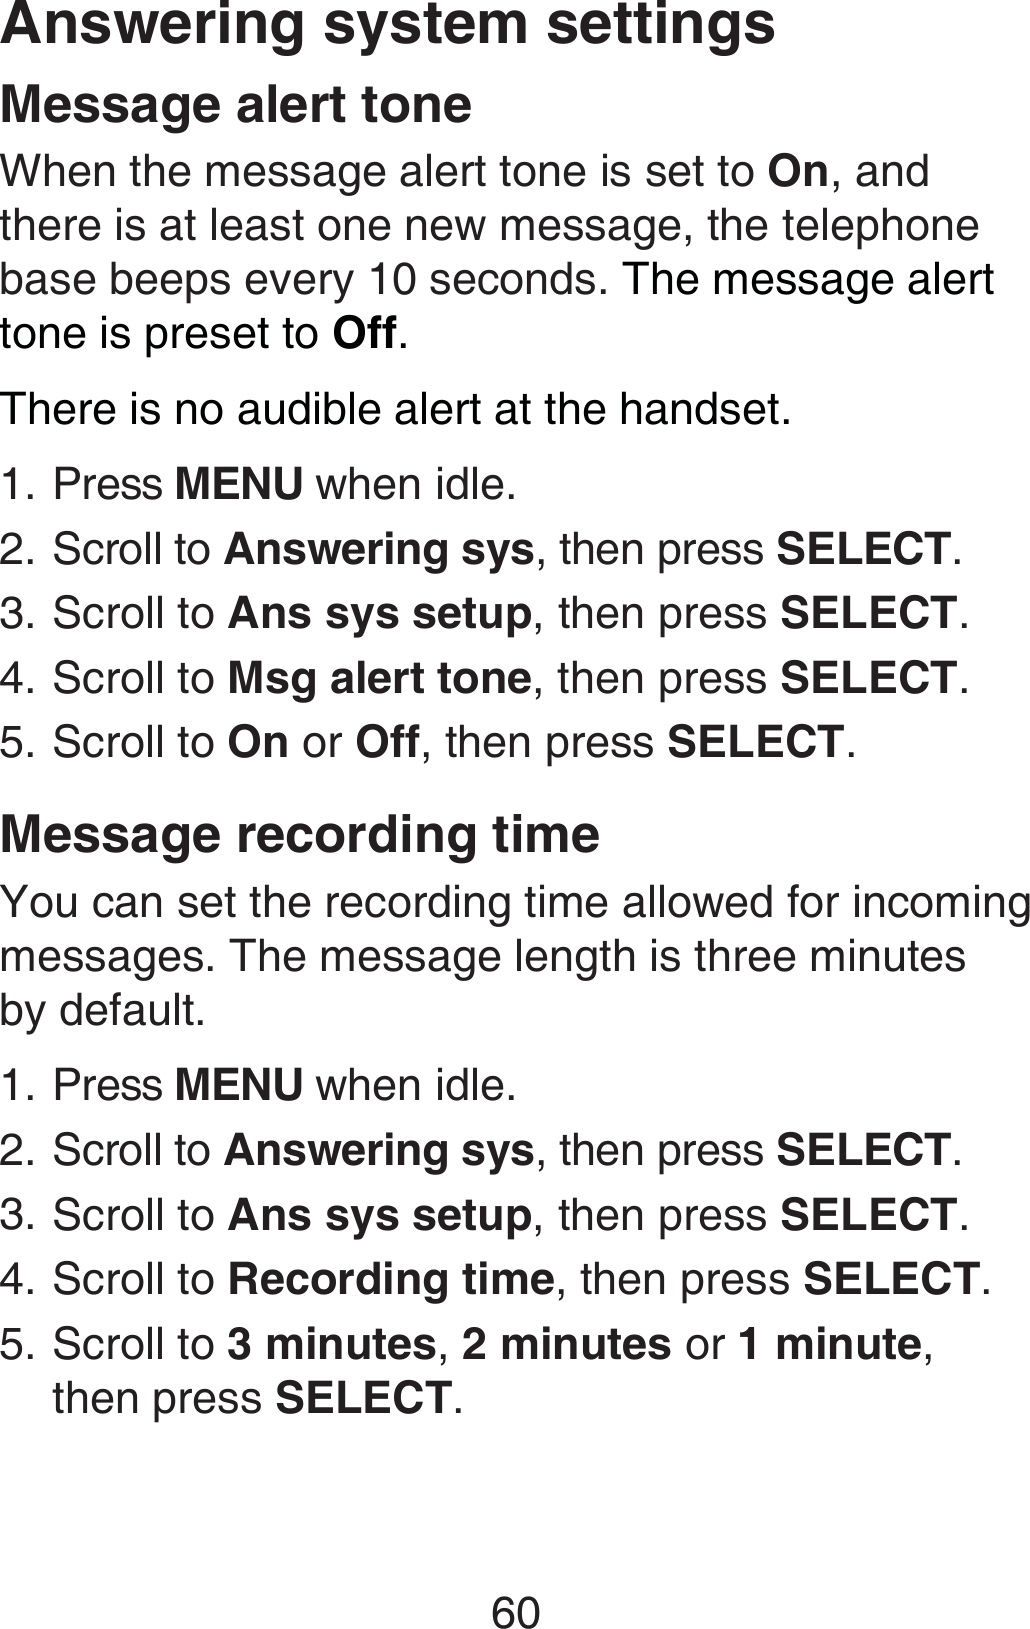 60Message alert toneWhen the message alert tone is set to On, and there is at least one new message, the telephone base beeps every 10 seconds. The message alert tone is preset to Off.There is no audible alert at the handset.Press MENU when idle.Scroll to Answering sys, then press SELECT.Scroll to Ans sys setup, then press SELECT.Scroll to Msg alert tone, then press SELECT.Scroll to On or Off, then press SELECT.Message recording timeYou can set the recording time allowed for incoming messages. The message length is three minutes  by default.Press MENU when idle.Scroll to Answering sys, then press SELECT.Scroll to Ans sys setup, then press SELECT.Scroll to Recording time, then press SELECT.Scroll to 3 minutes, 2 minutes or 1 minute, then press SELECT.1.2.3.4.5.1.2.3.4.5.Answering system settings